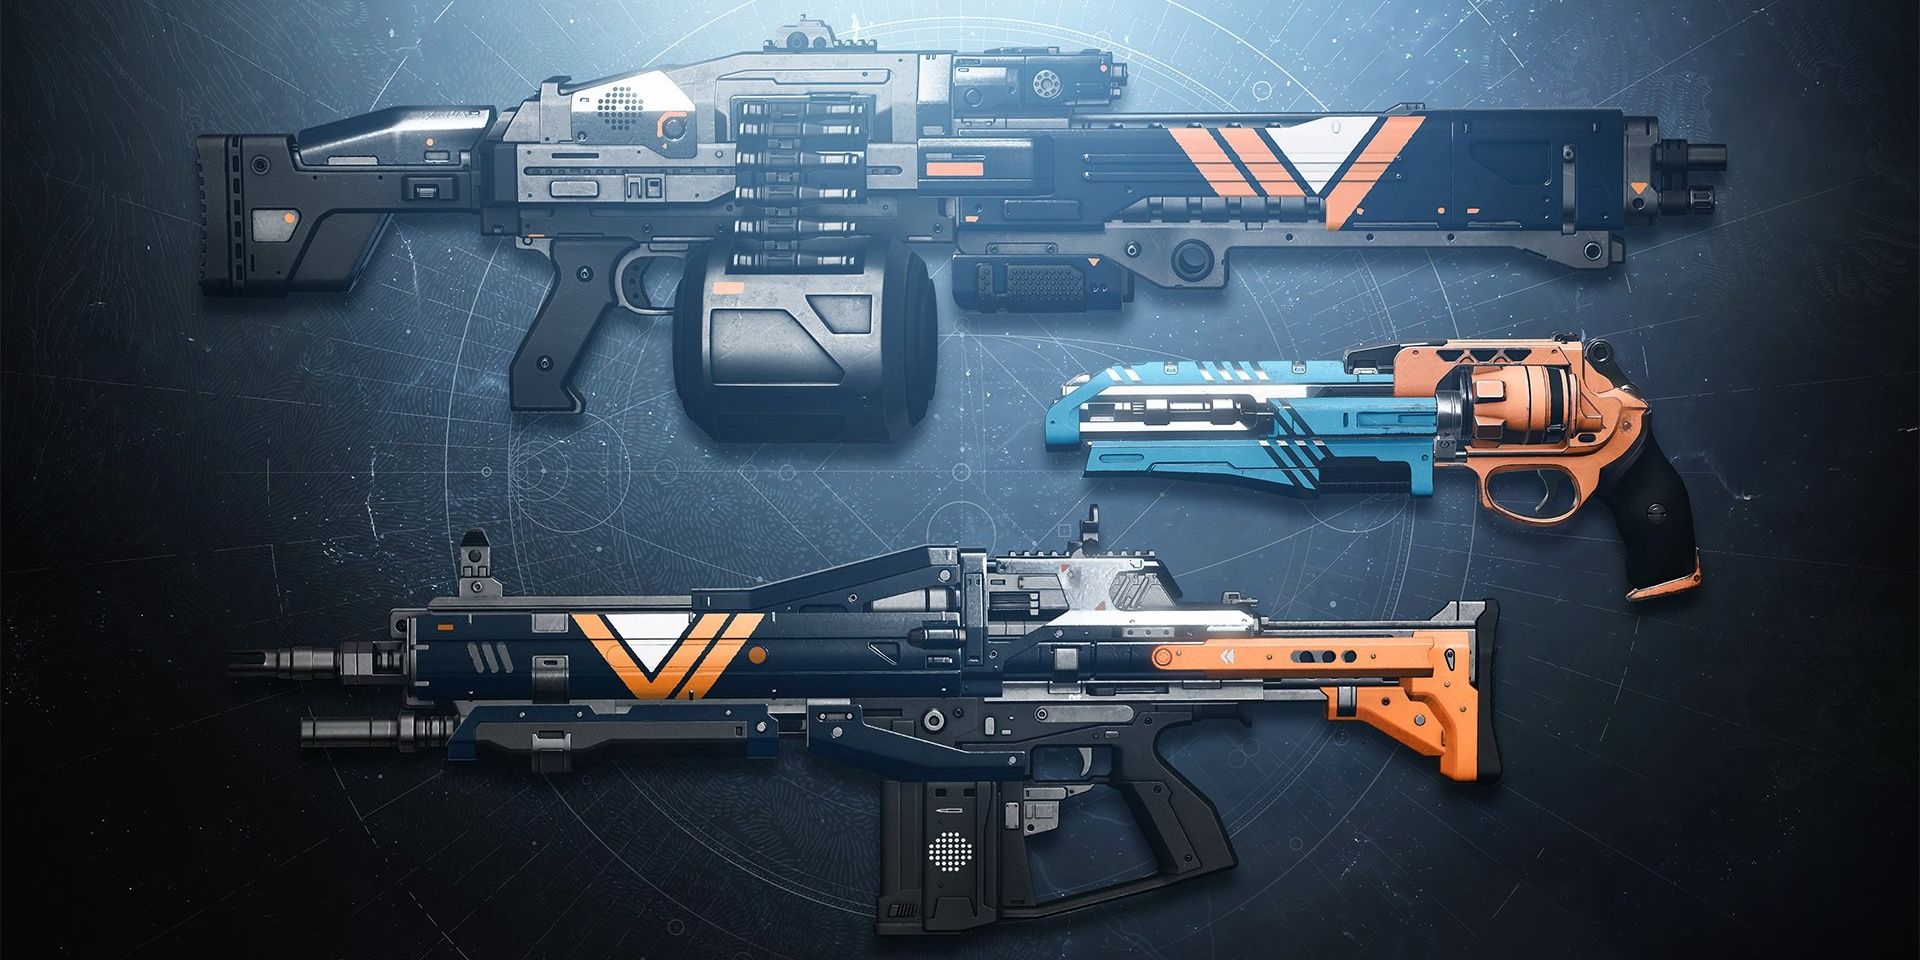 Destiny 2 Season of the Chosen Vanguard branded weapons of a machine gun, hand cannon and assault rifle from top to bottom on a navy background